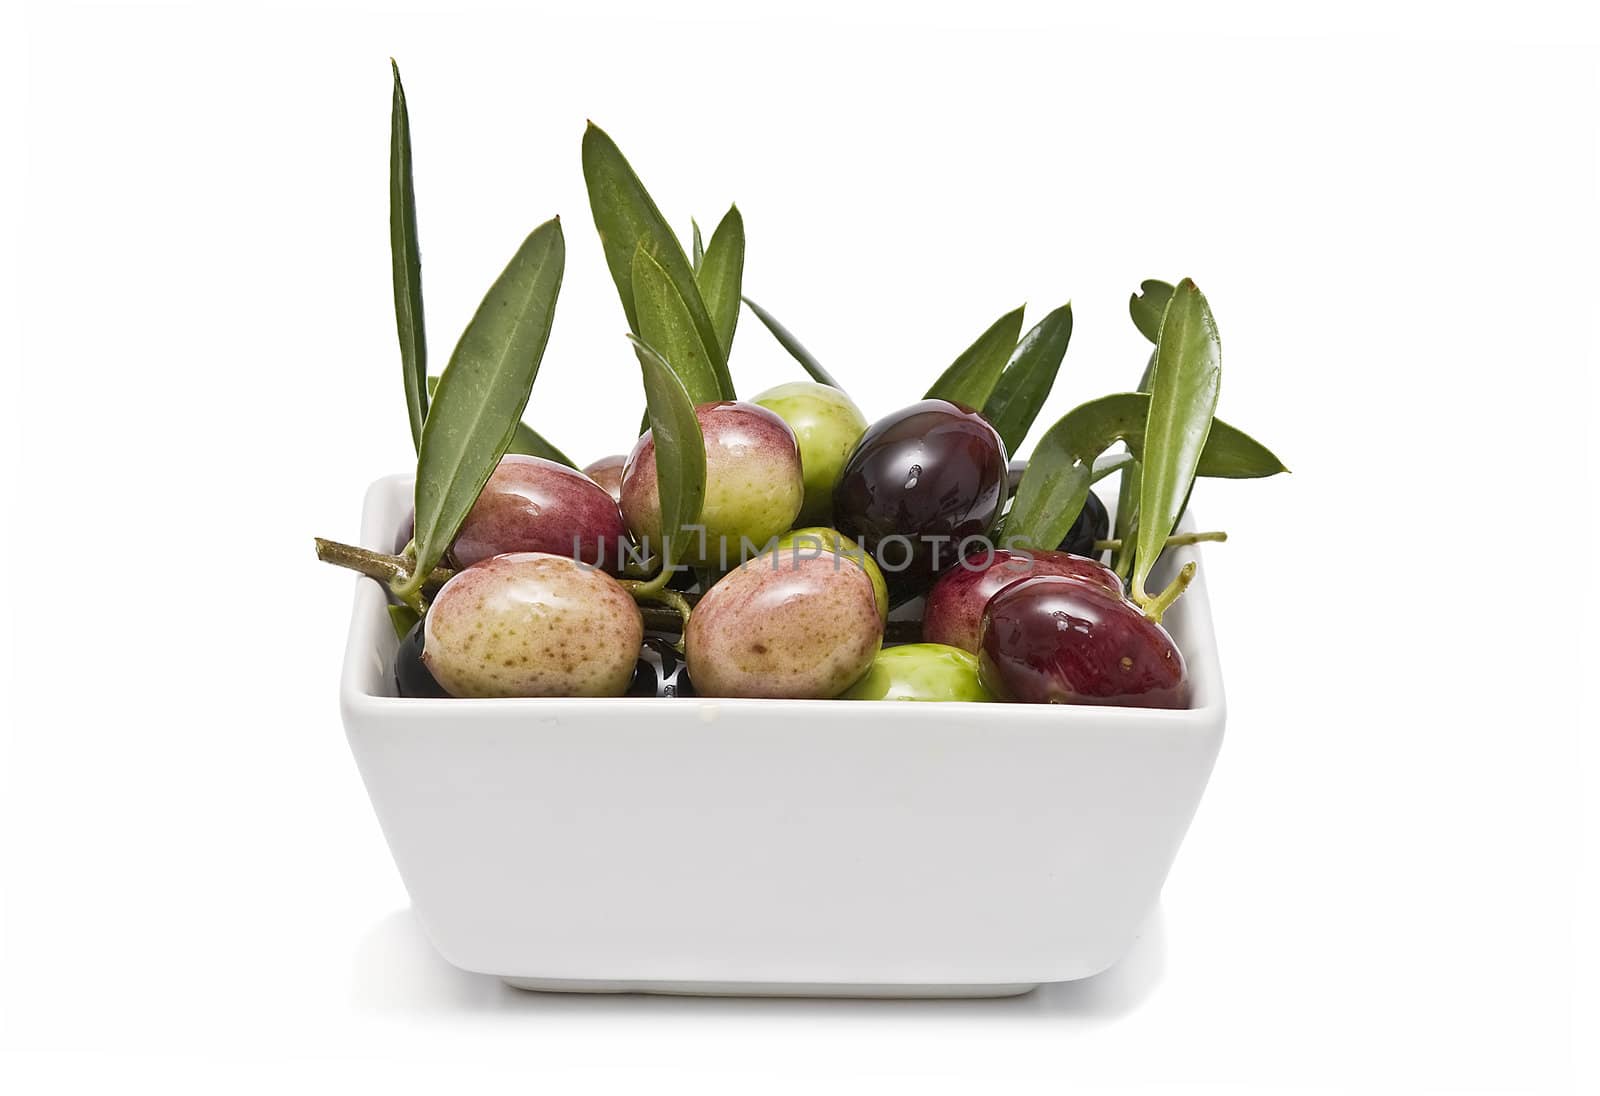 A white bowl full of olives and leaves.